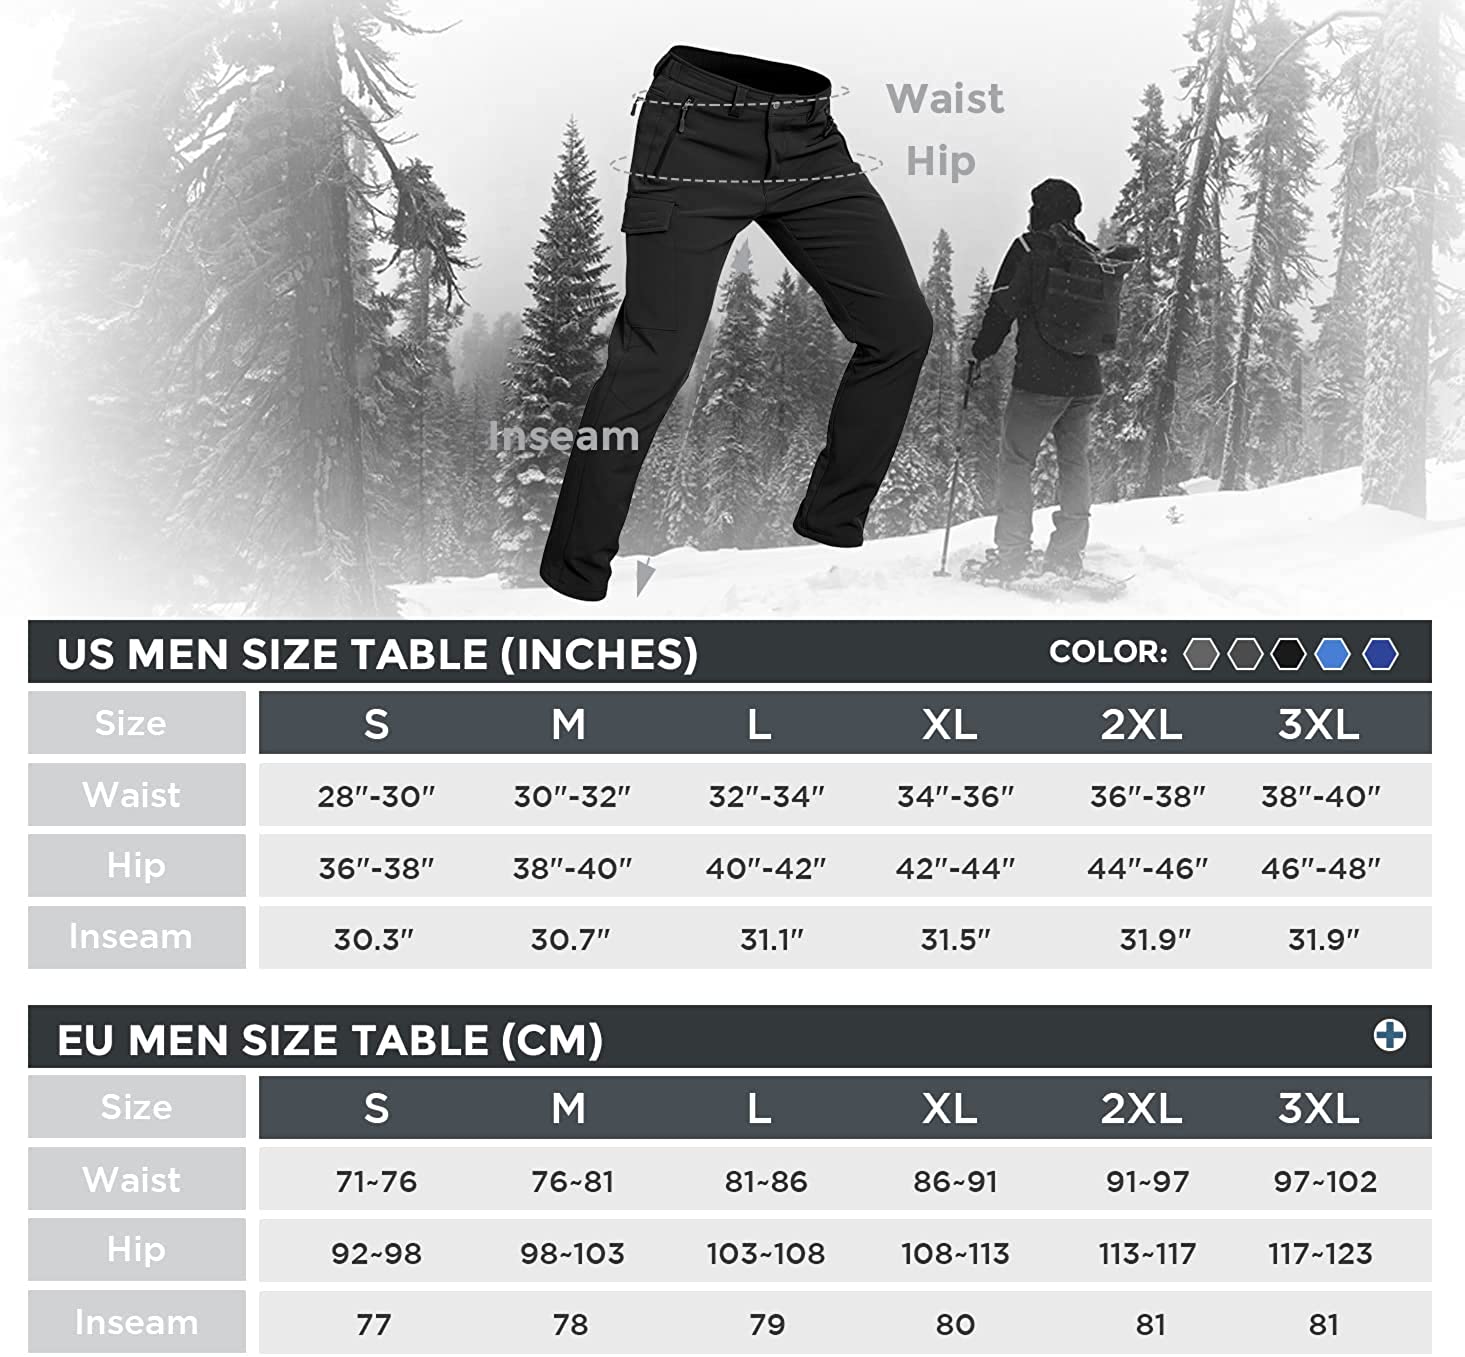  Fleece Lined Leggings Womens Winter Water Resistant Thermal  Hiking Pants Running Skiing Tights Cold Weather Gear Grey 3XL